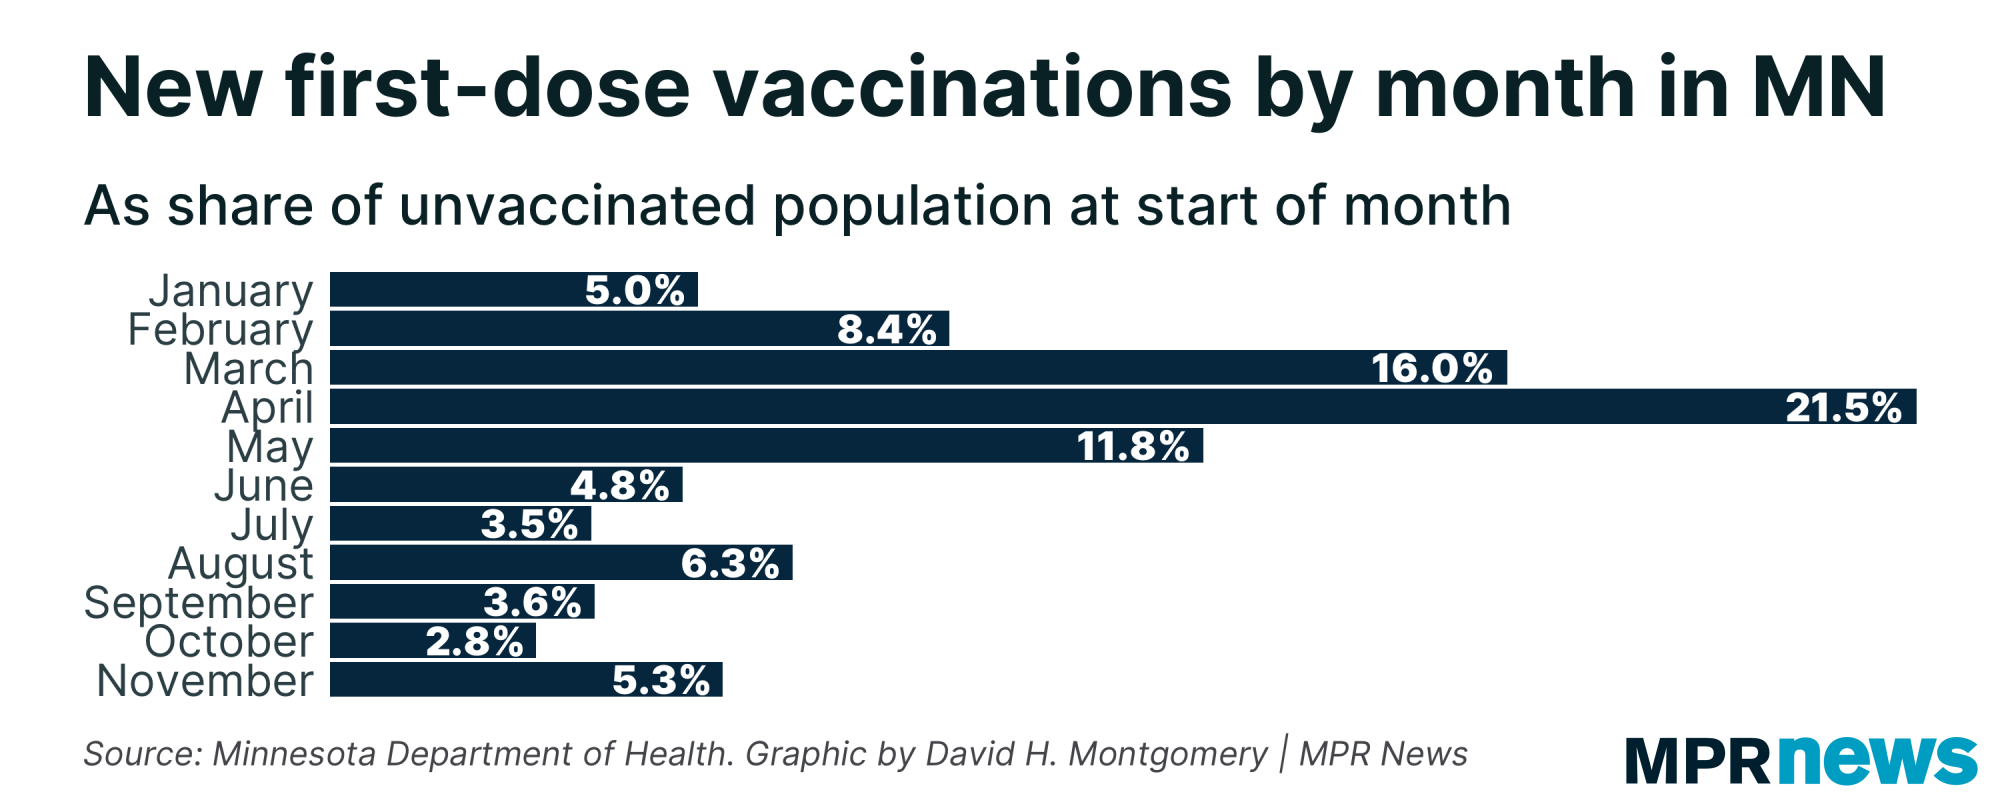 Graph of new COVID-19 vaccinations as a percent of the unvaccinated population